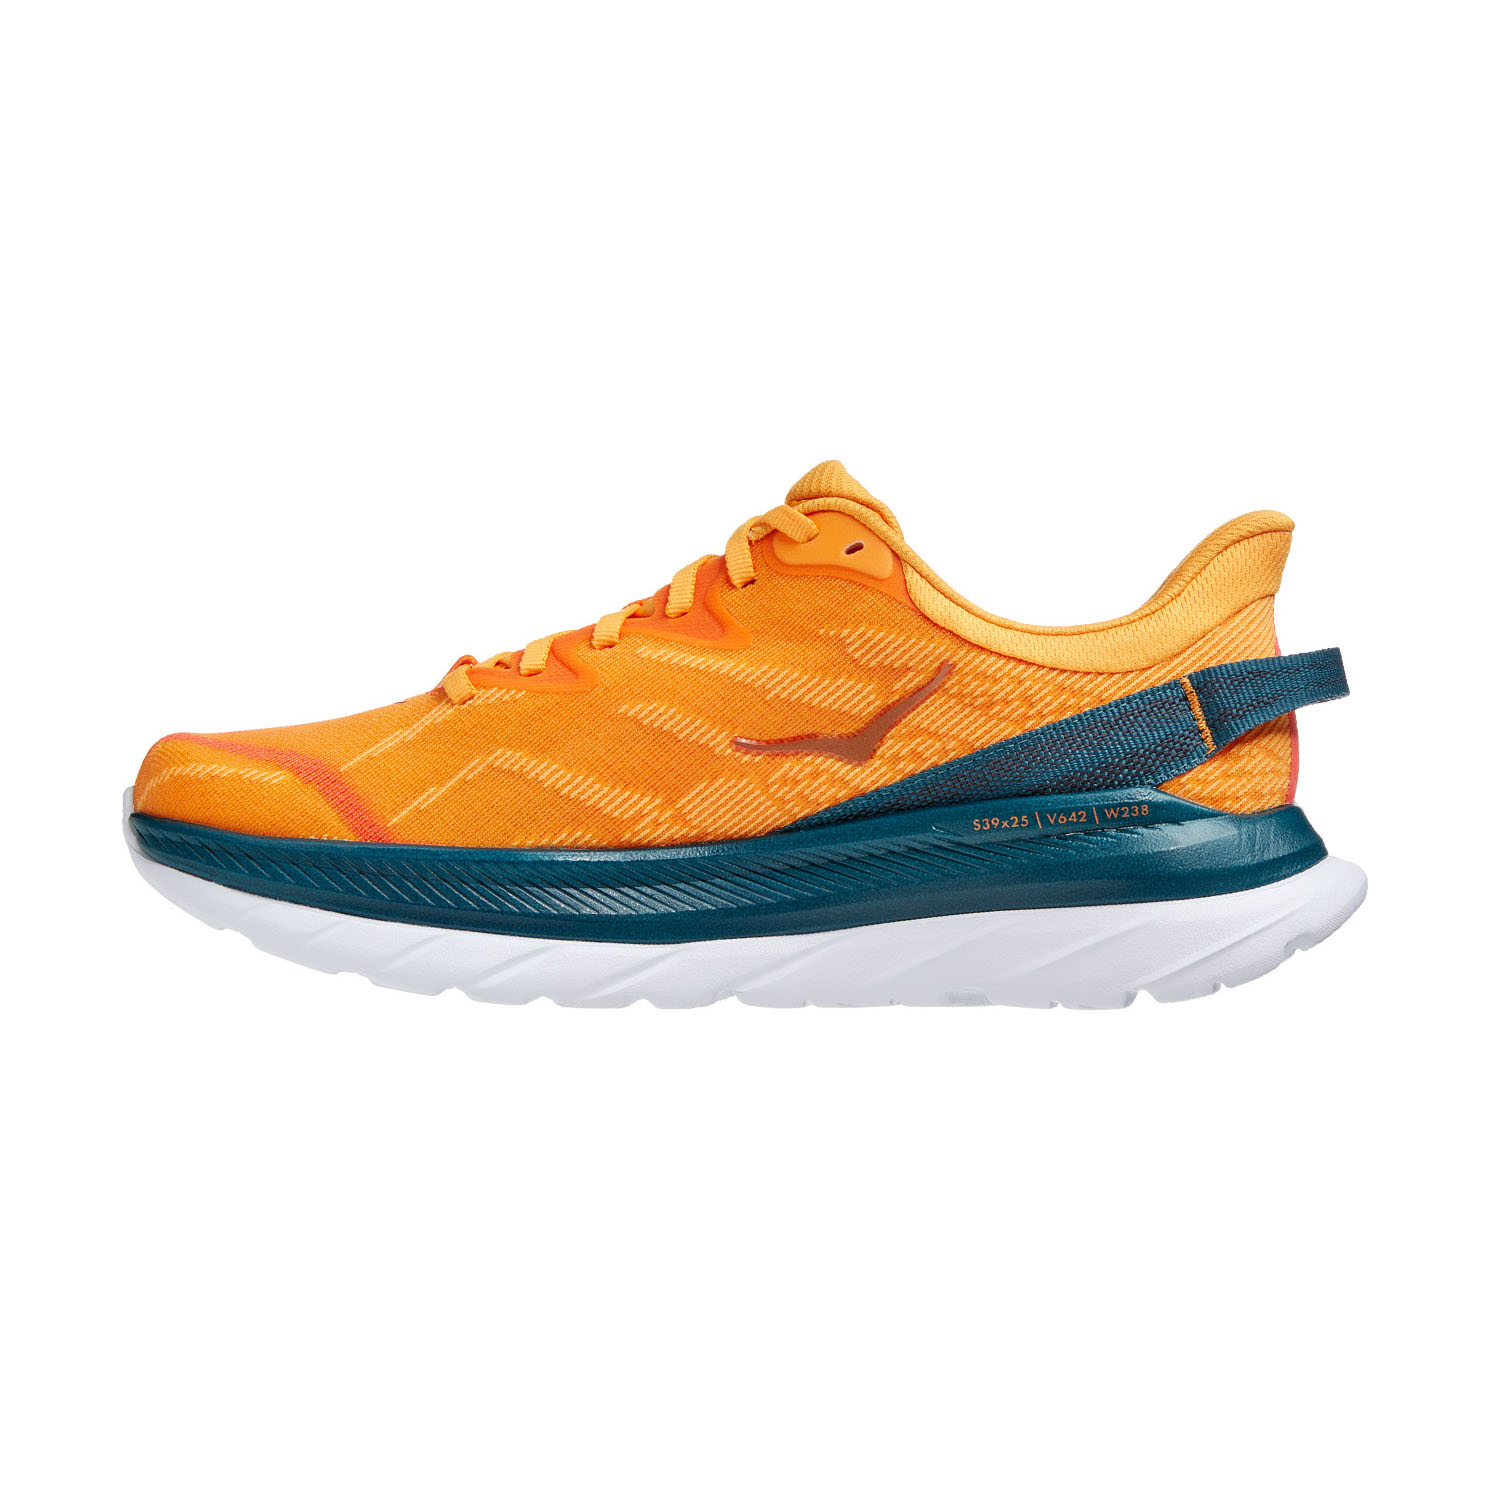 Hoka One One Mach Supersonic Men's Running Shoes Radiant Yellow